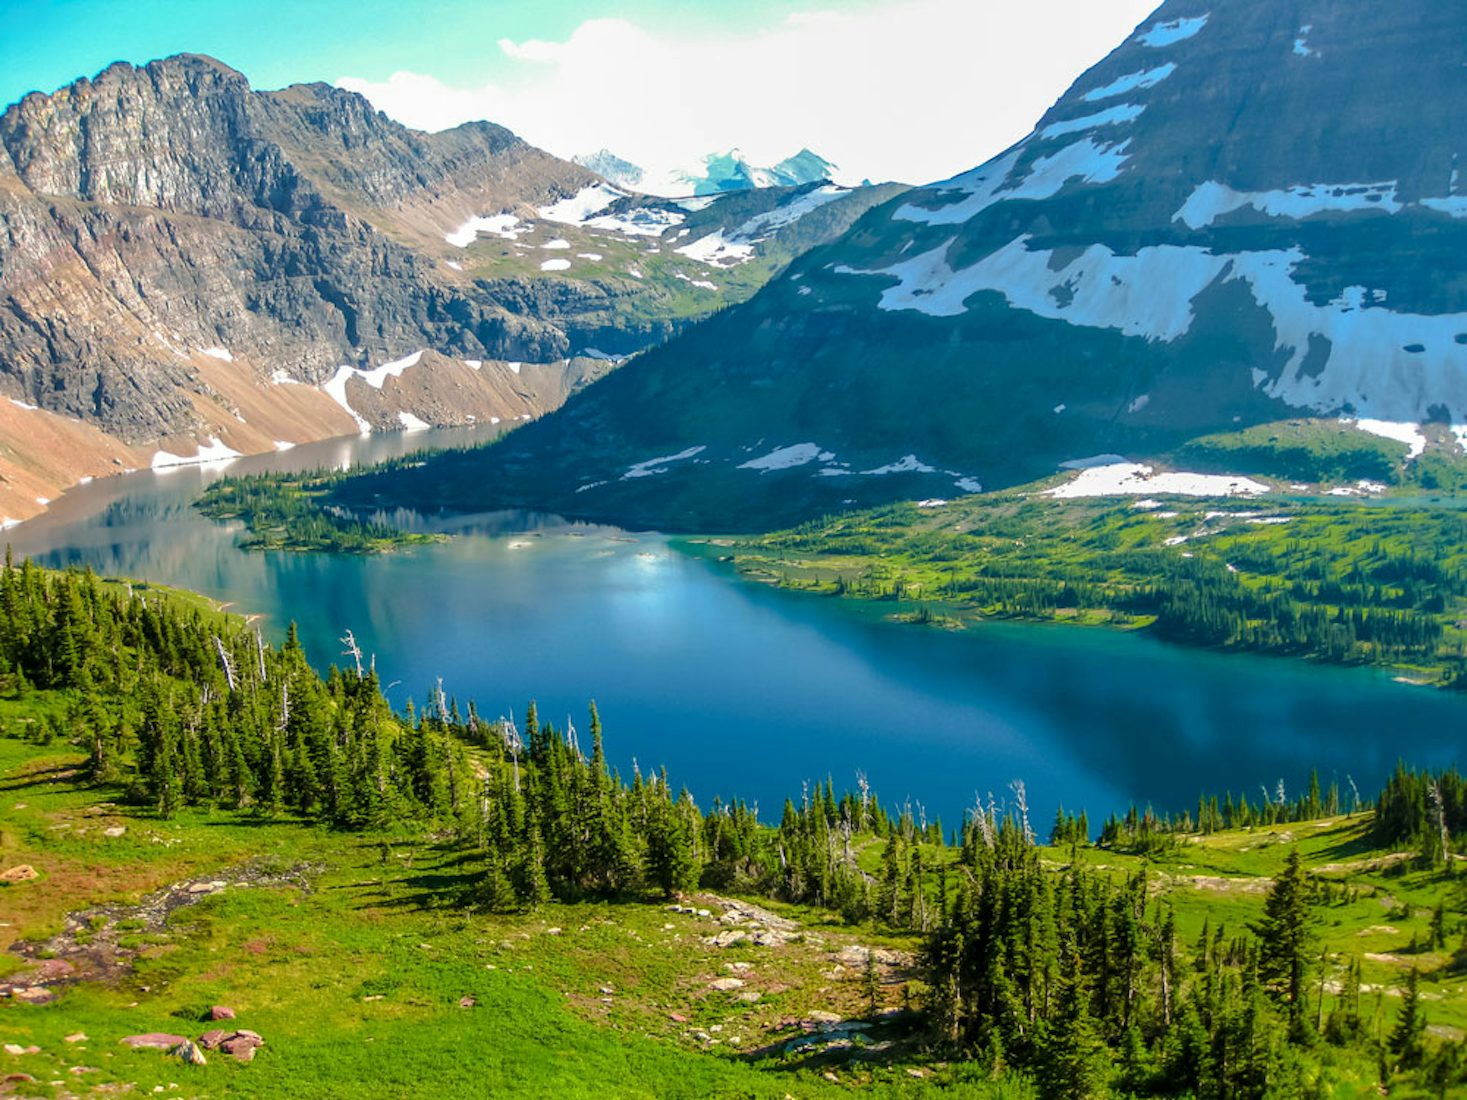 When Is The Best Time To Visit Glacier National Park